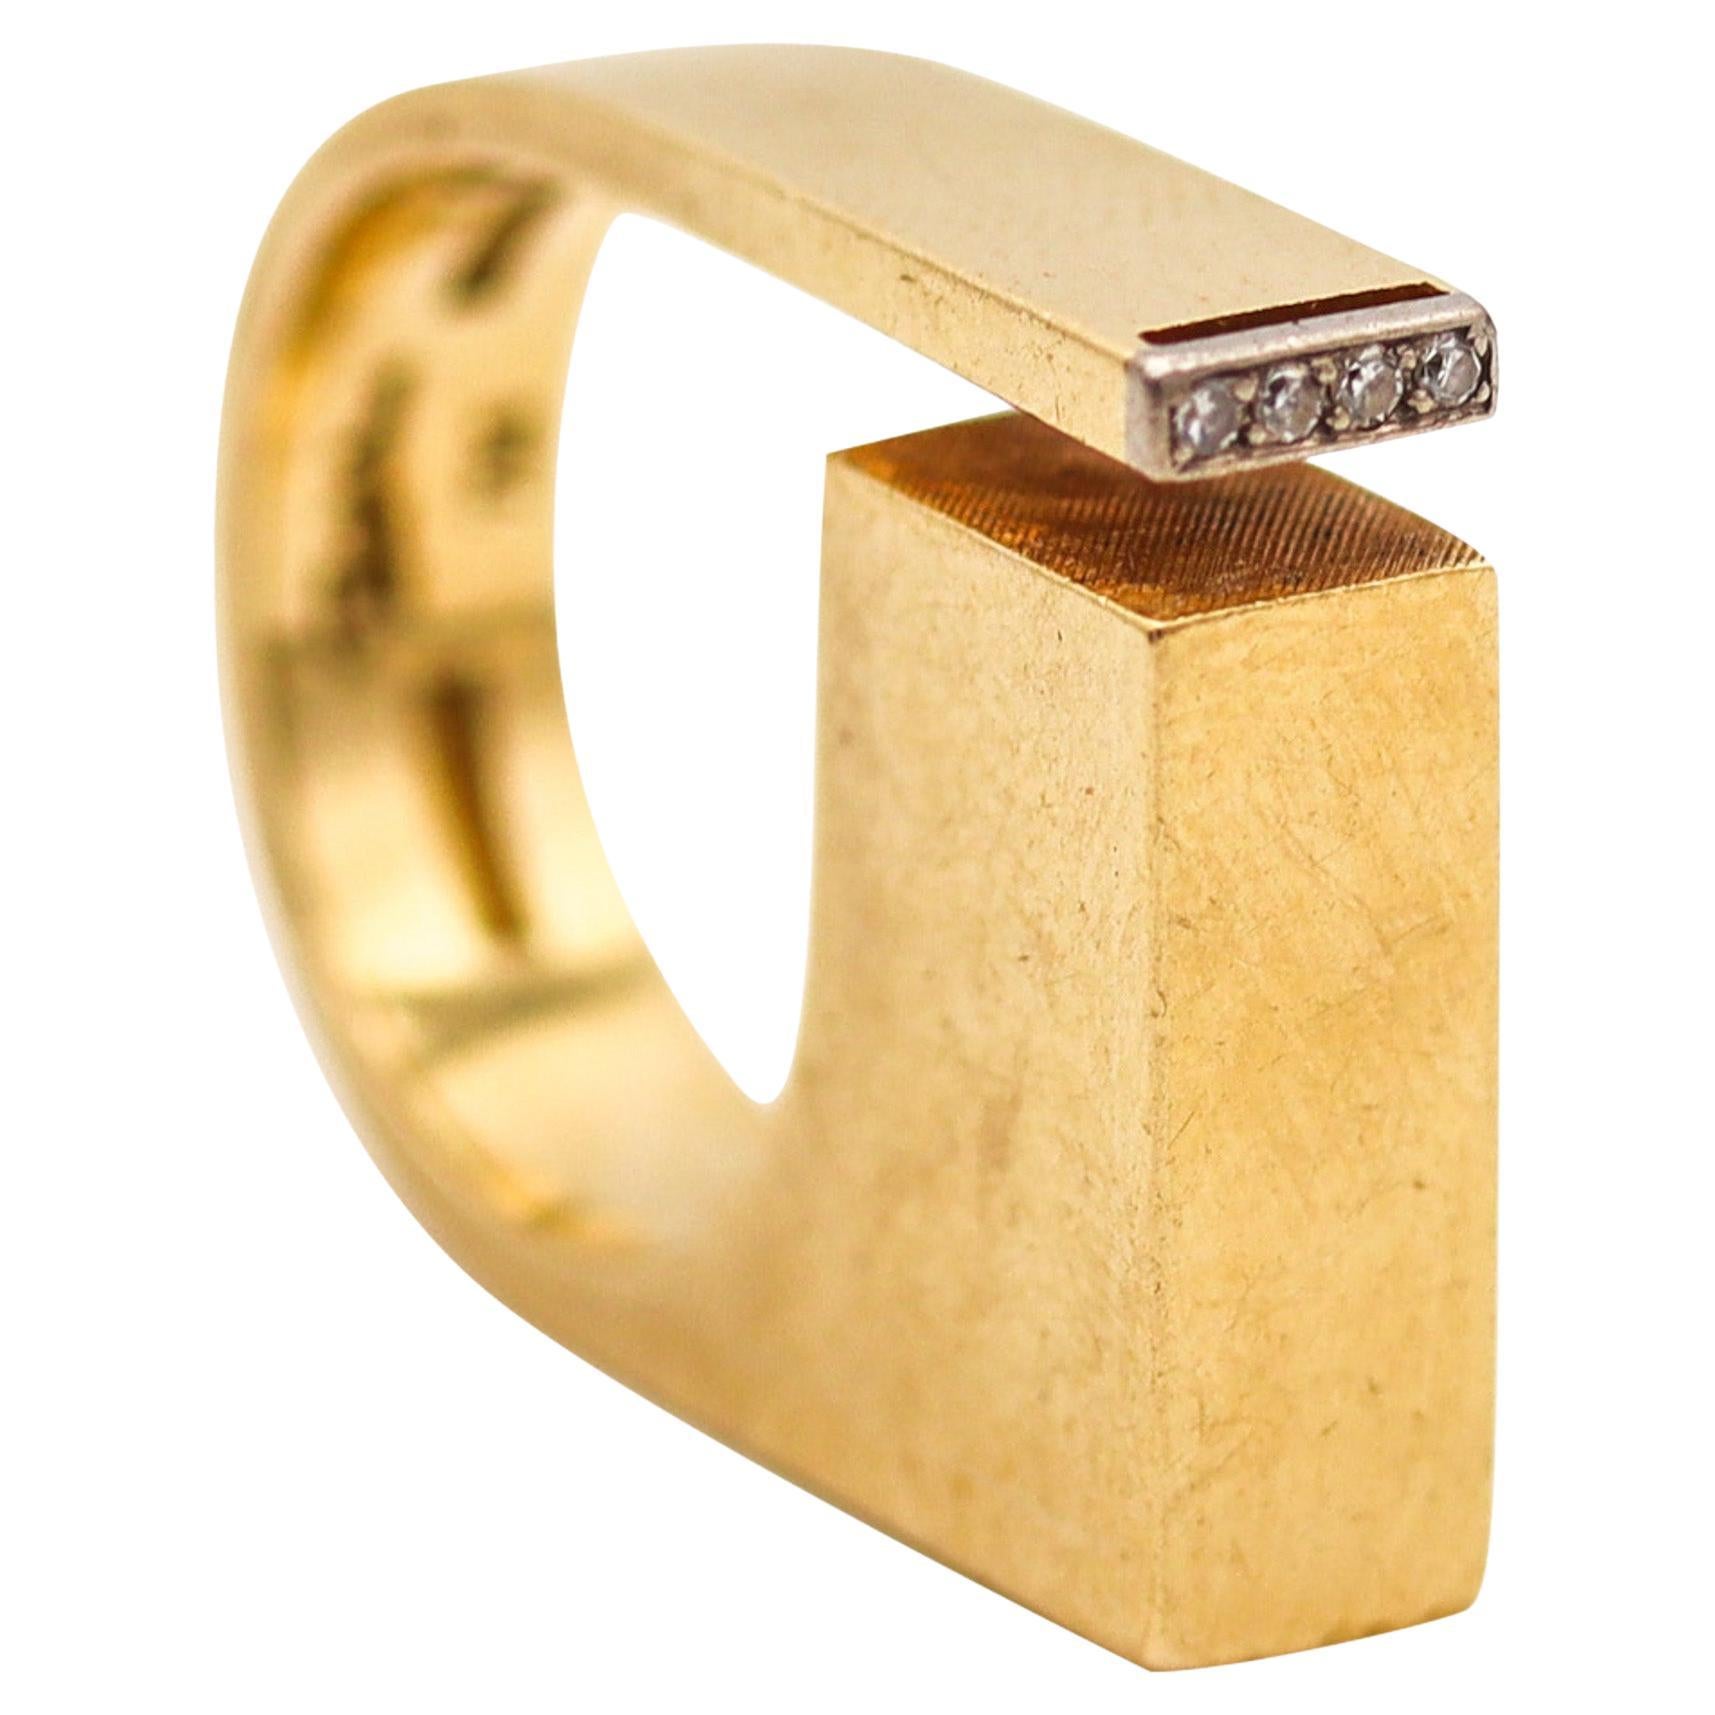 Rey Urban 1970 Denmark Geometric Sculptural Ring in Solid 18K Gold And Diamonds